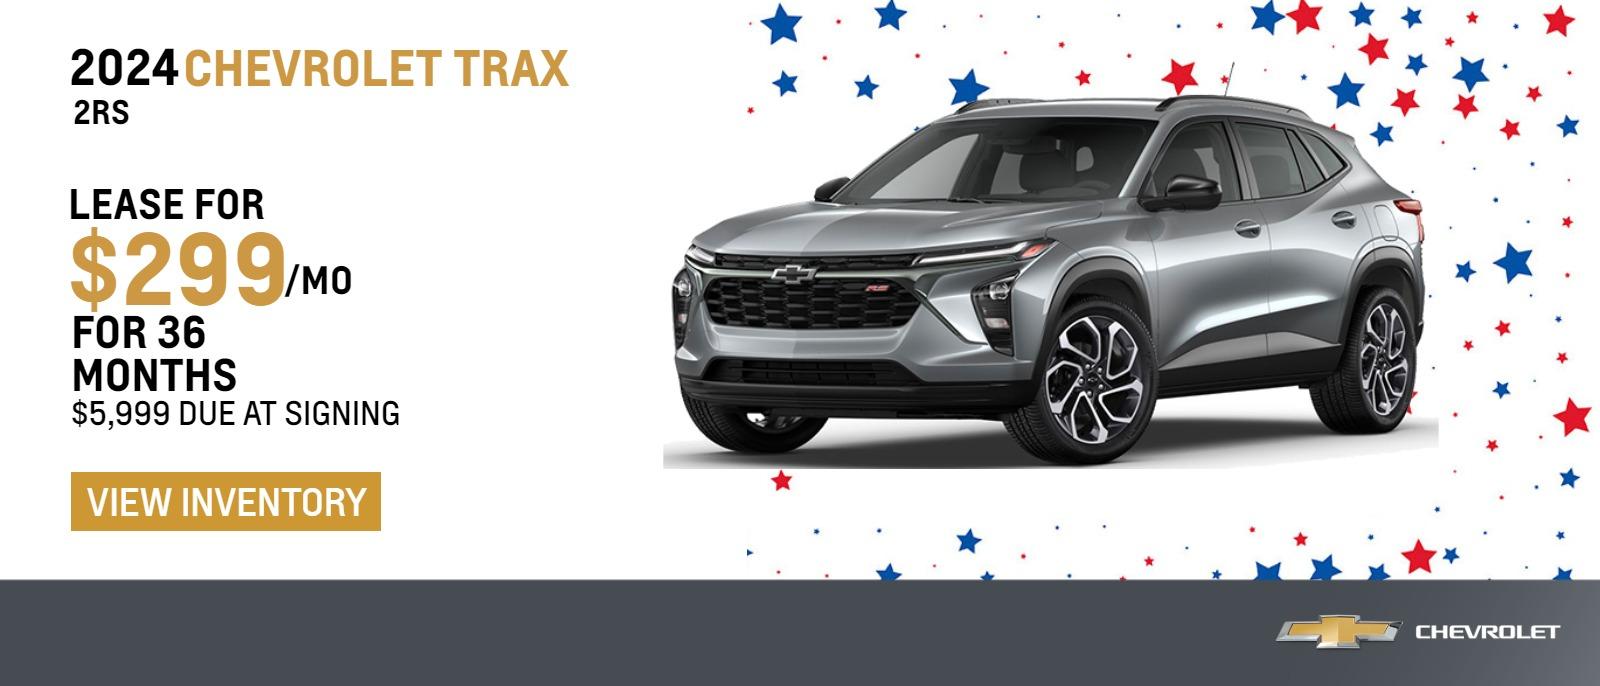 2024 Chevrolet Trax 2RS
$299 Month Lease | 36 Months | $5999 Due at signing